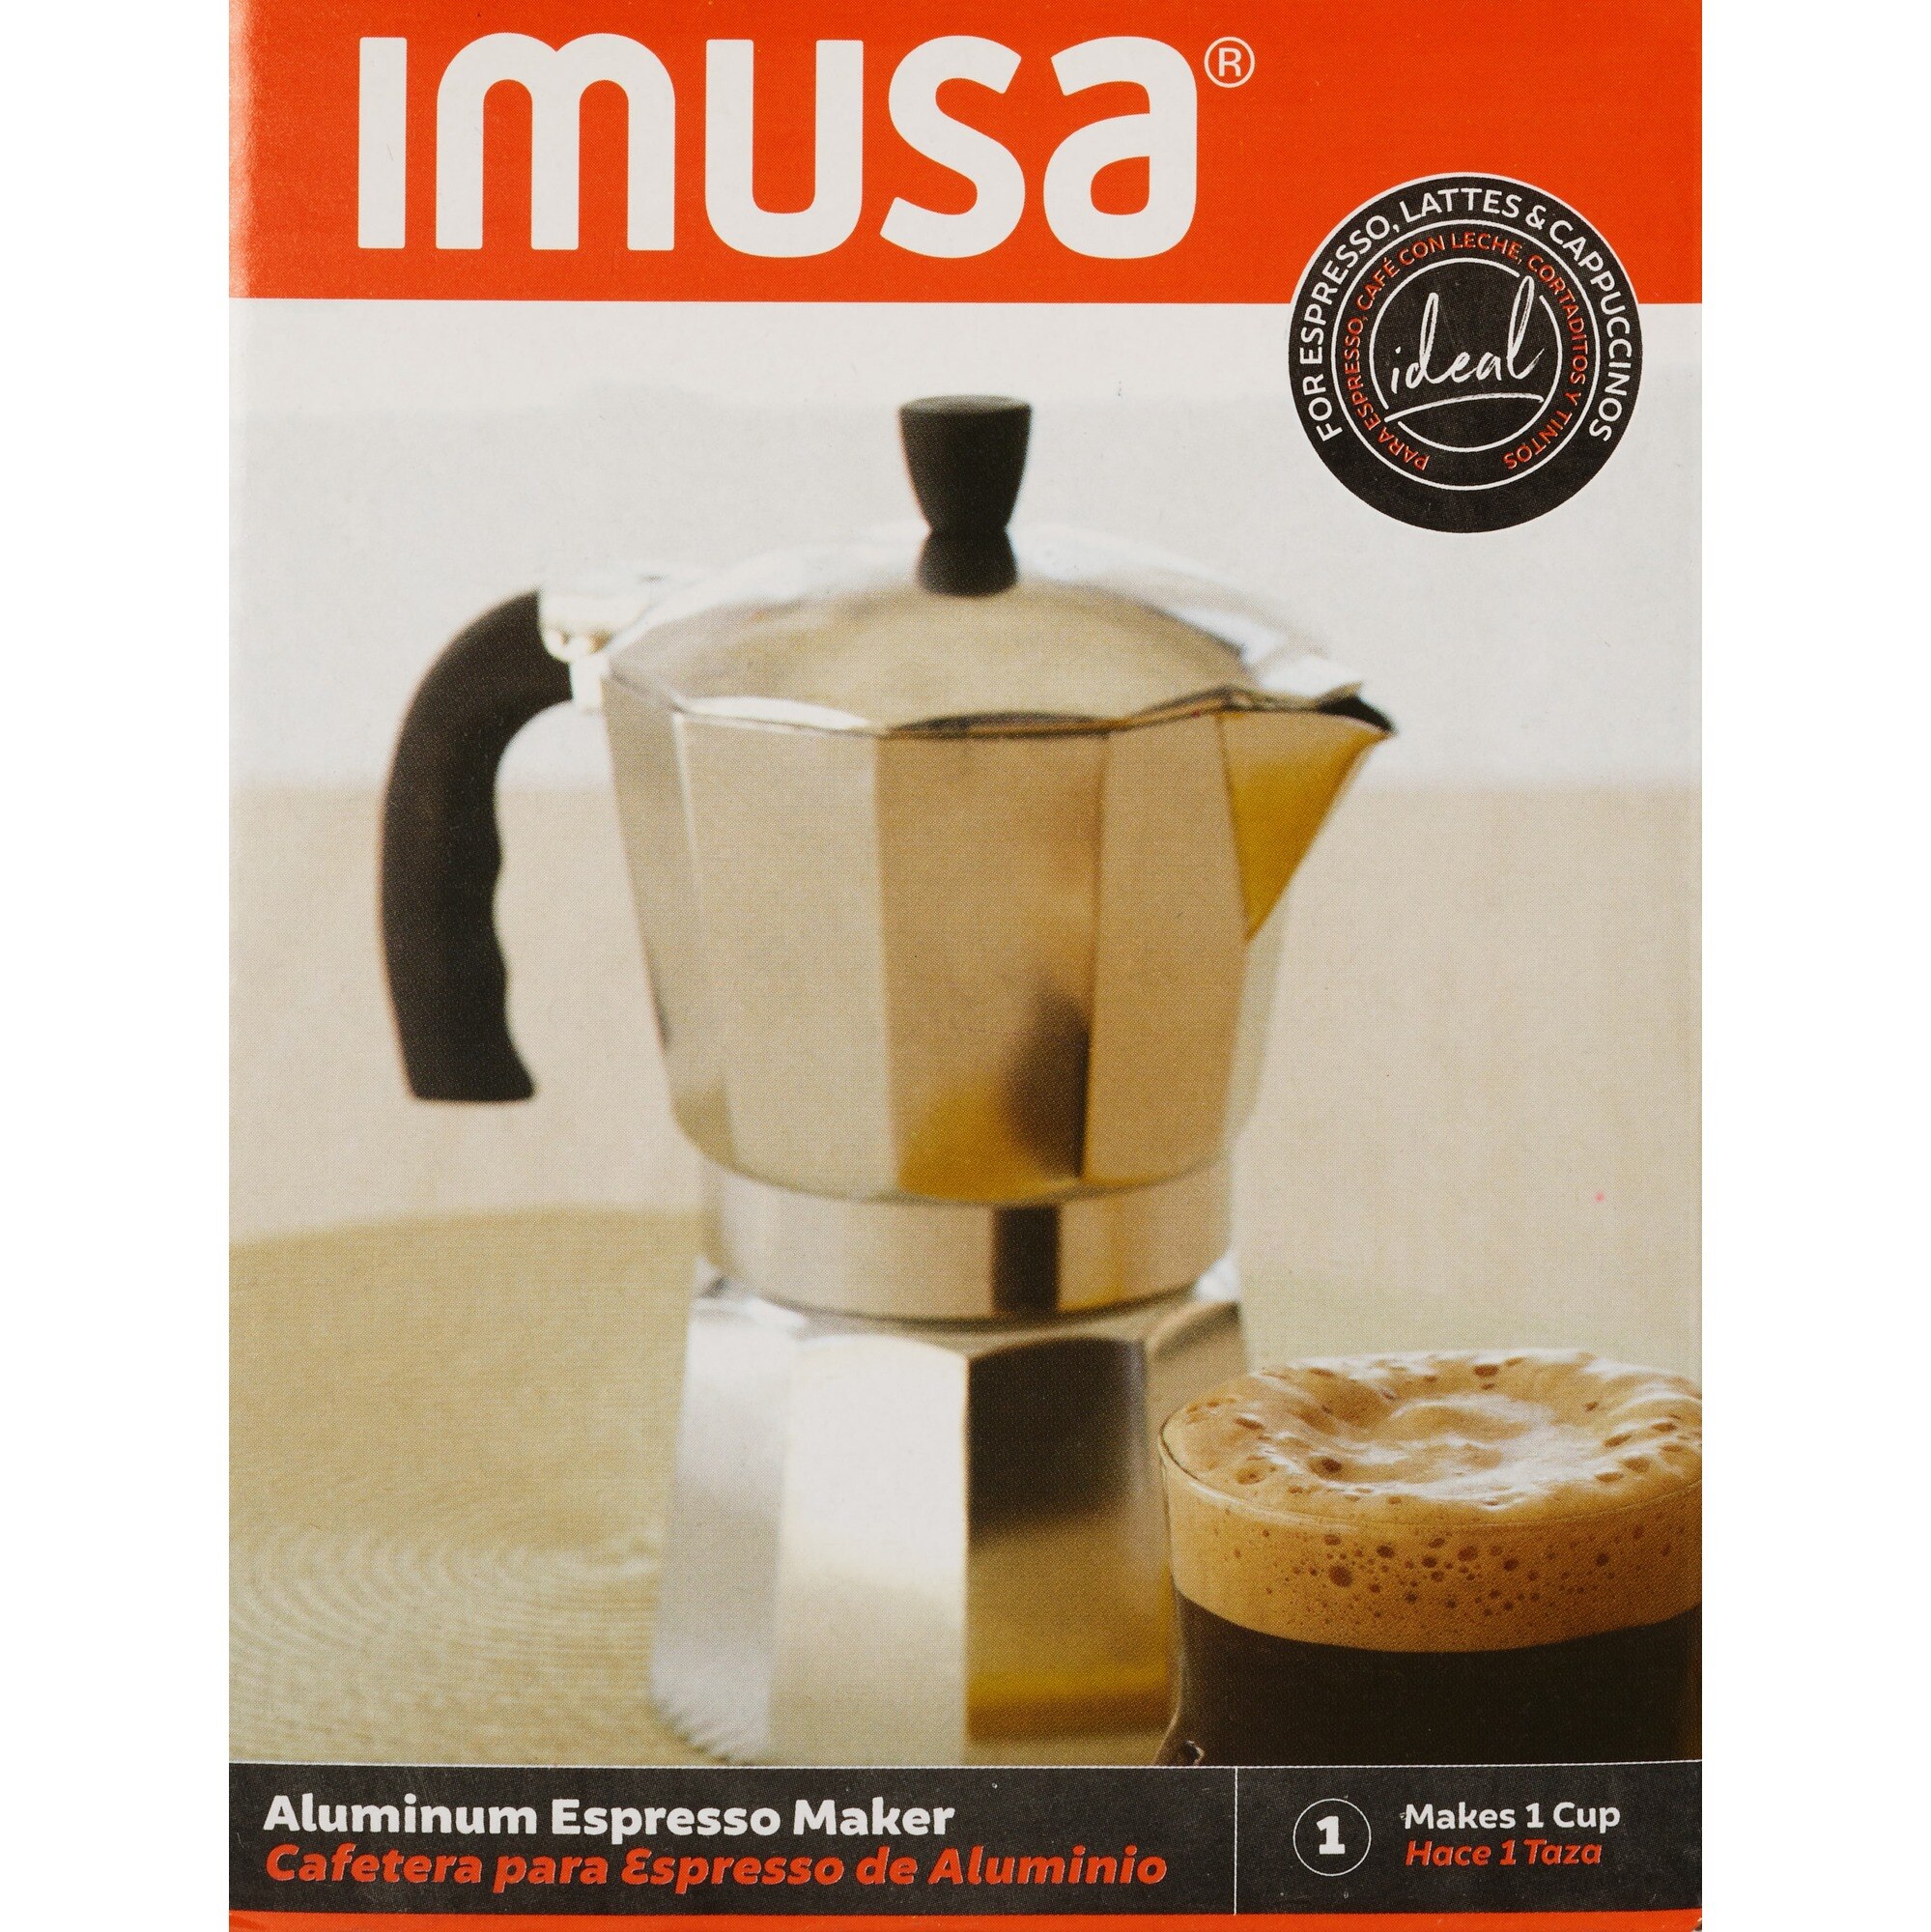 Cafetera IMUSA Cool Touch - Imusa